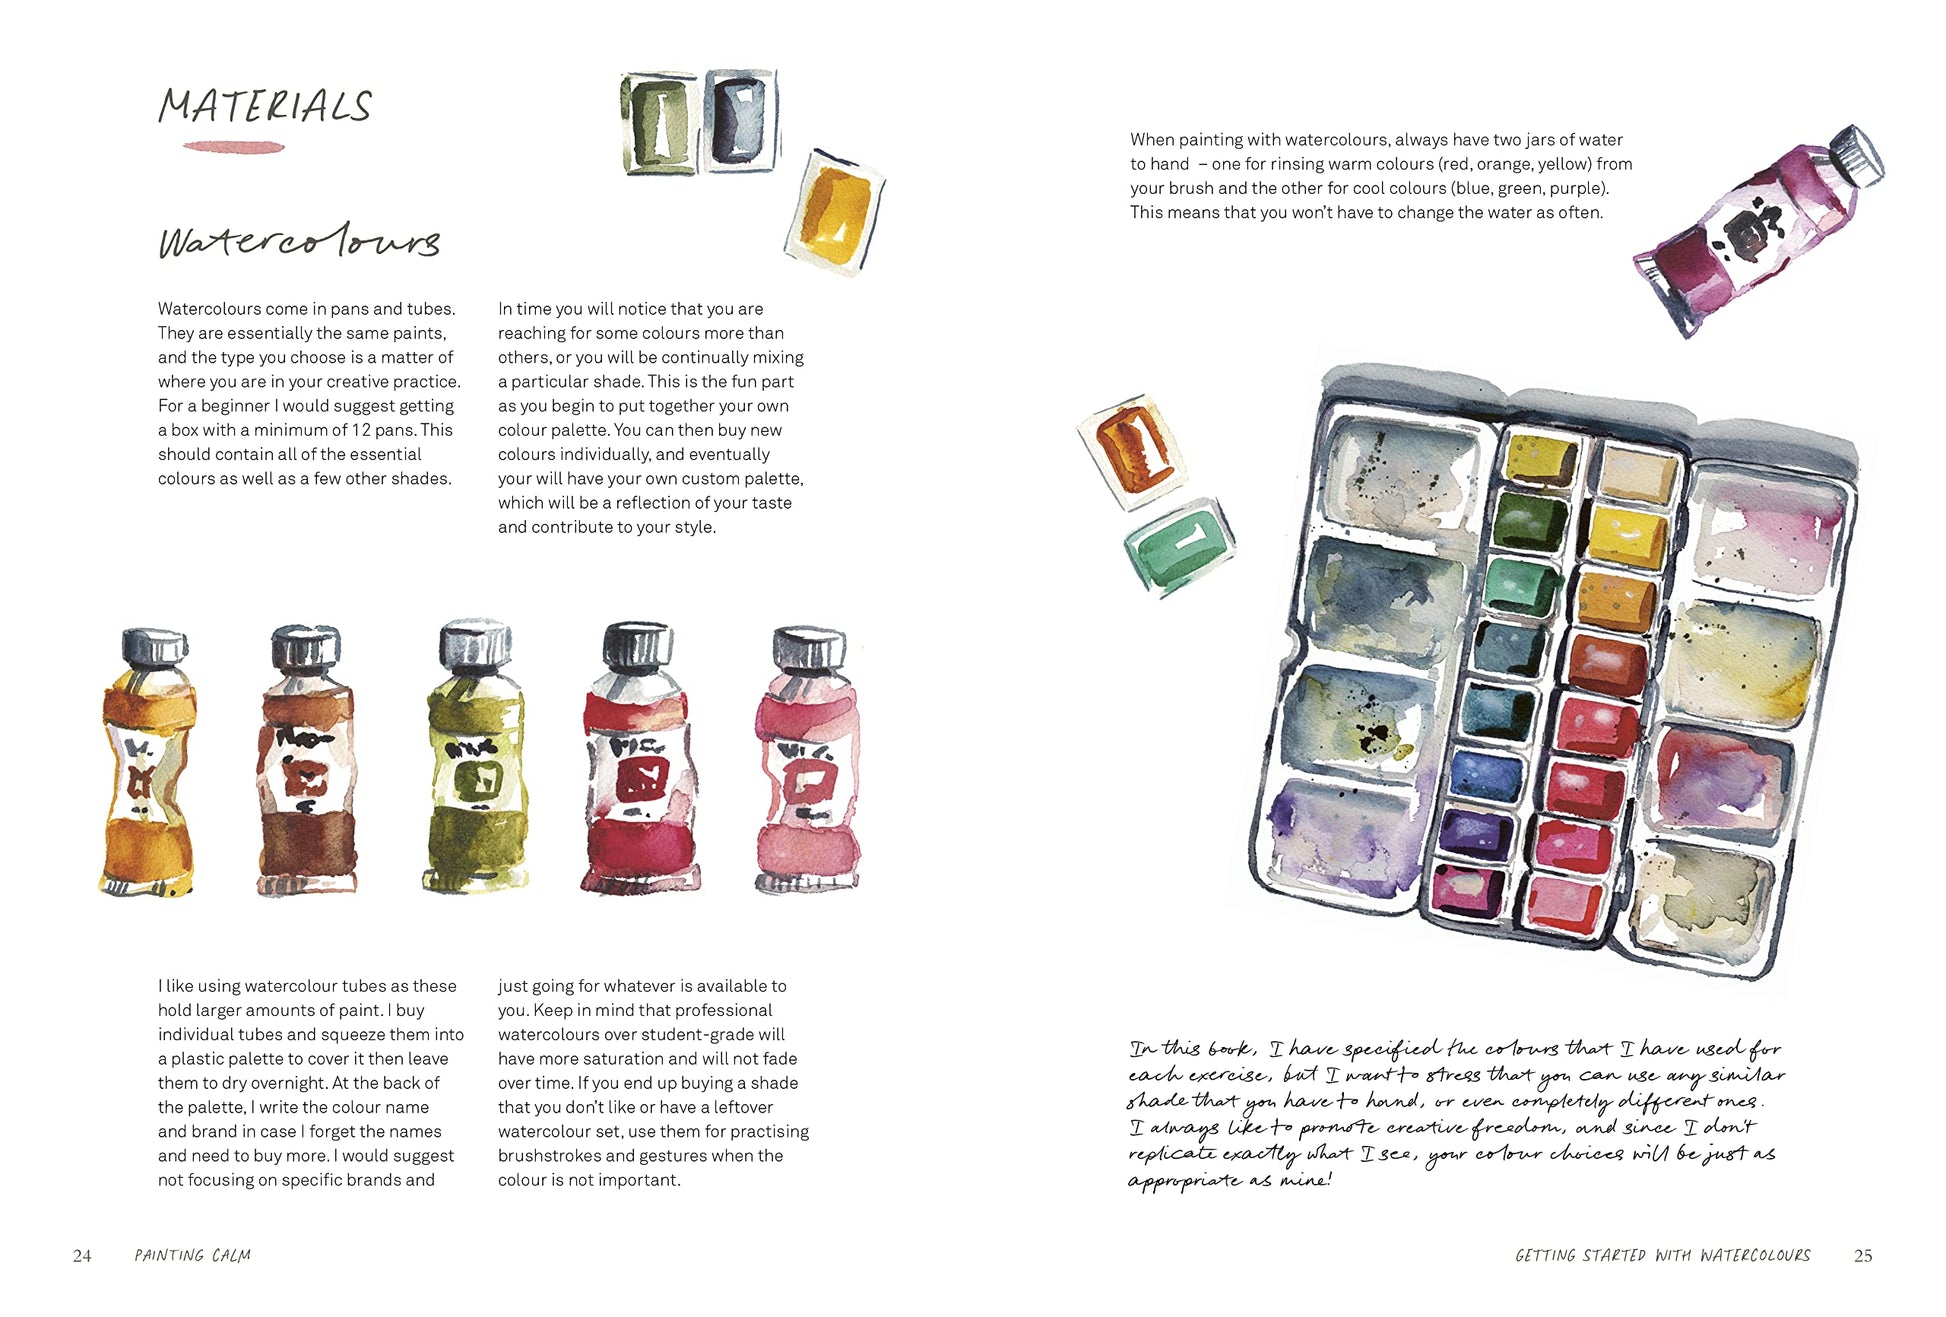 Painting Calm: Connect to Nature Through the Art of Watercolour - Odd Nodd Art Supply